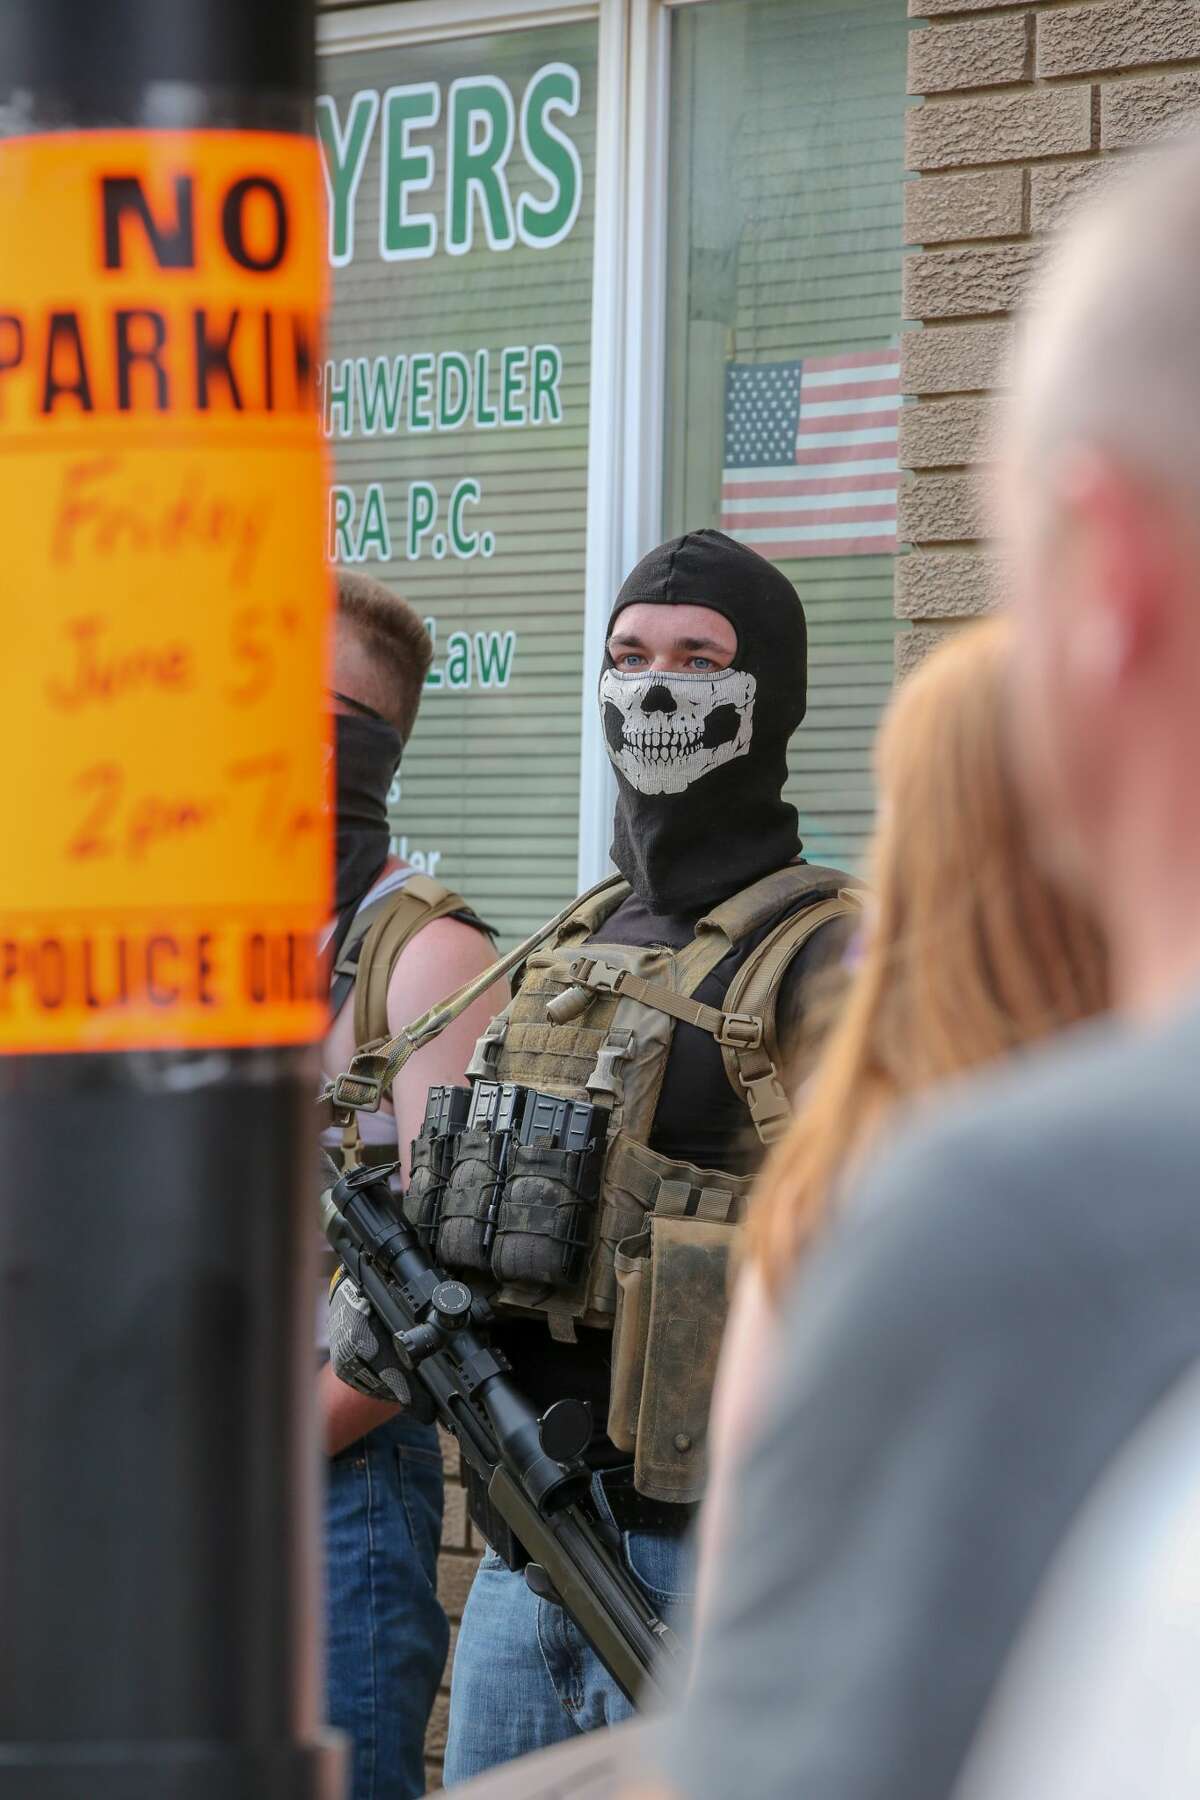 Huron Daily Tribune photos from a Black Lives Matter rally in Bad Axe on Friday, June 5, 2020 include images of men holding weapons among those in attendance.